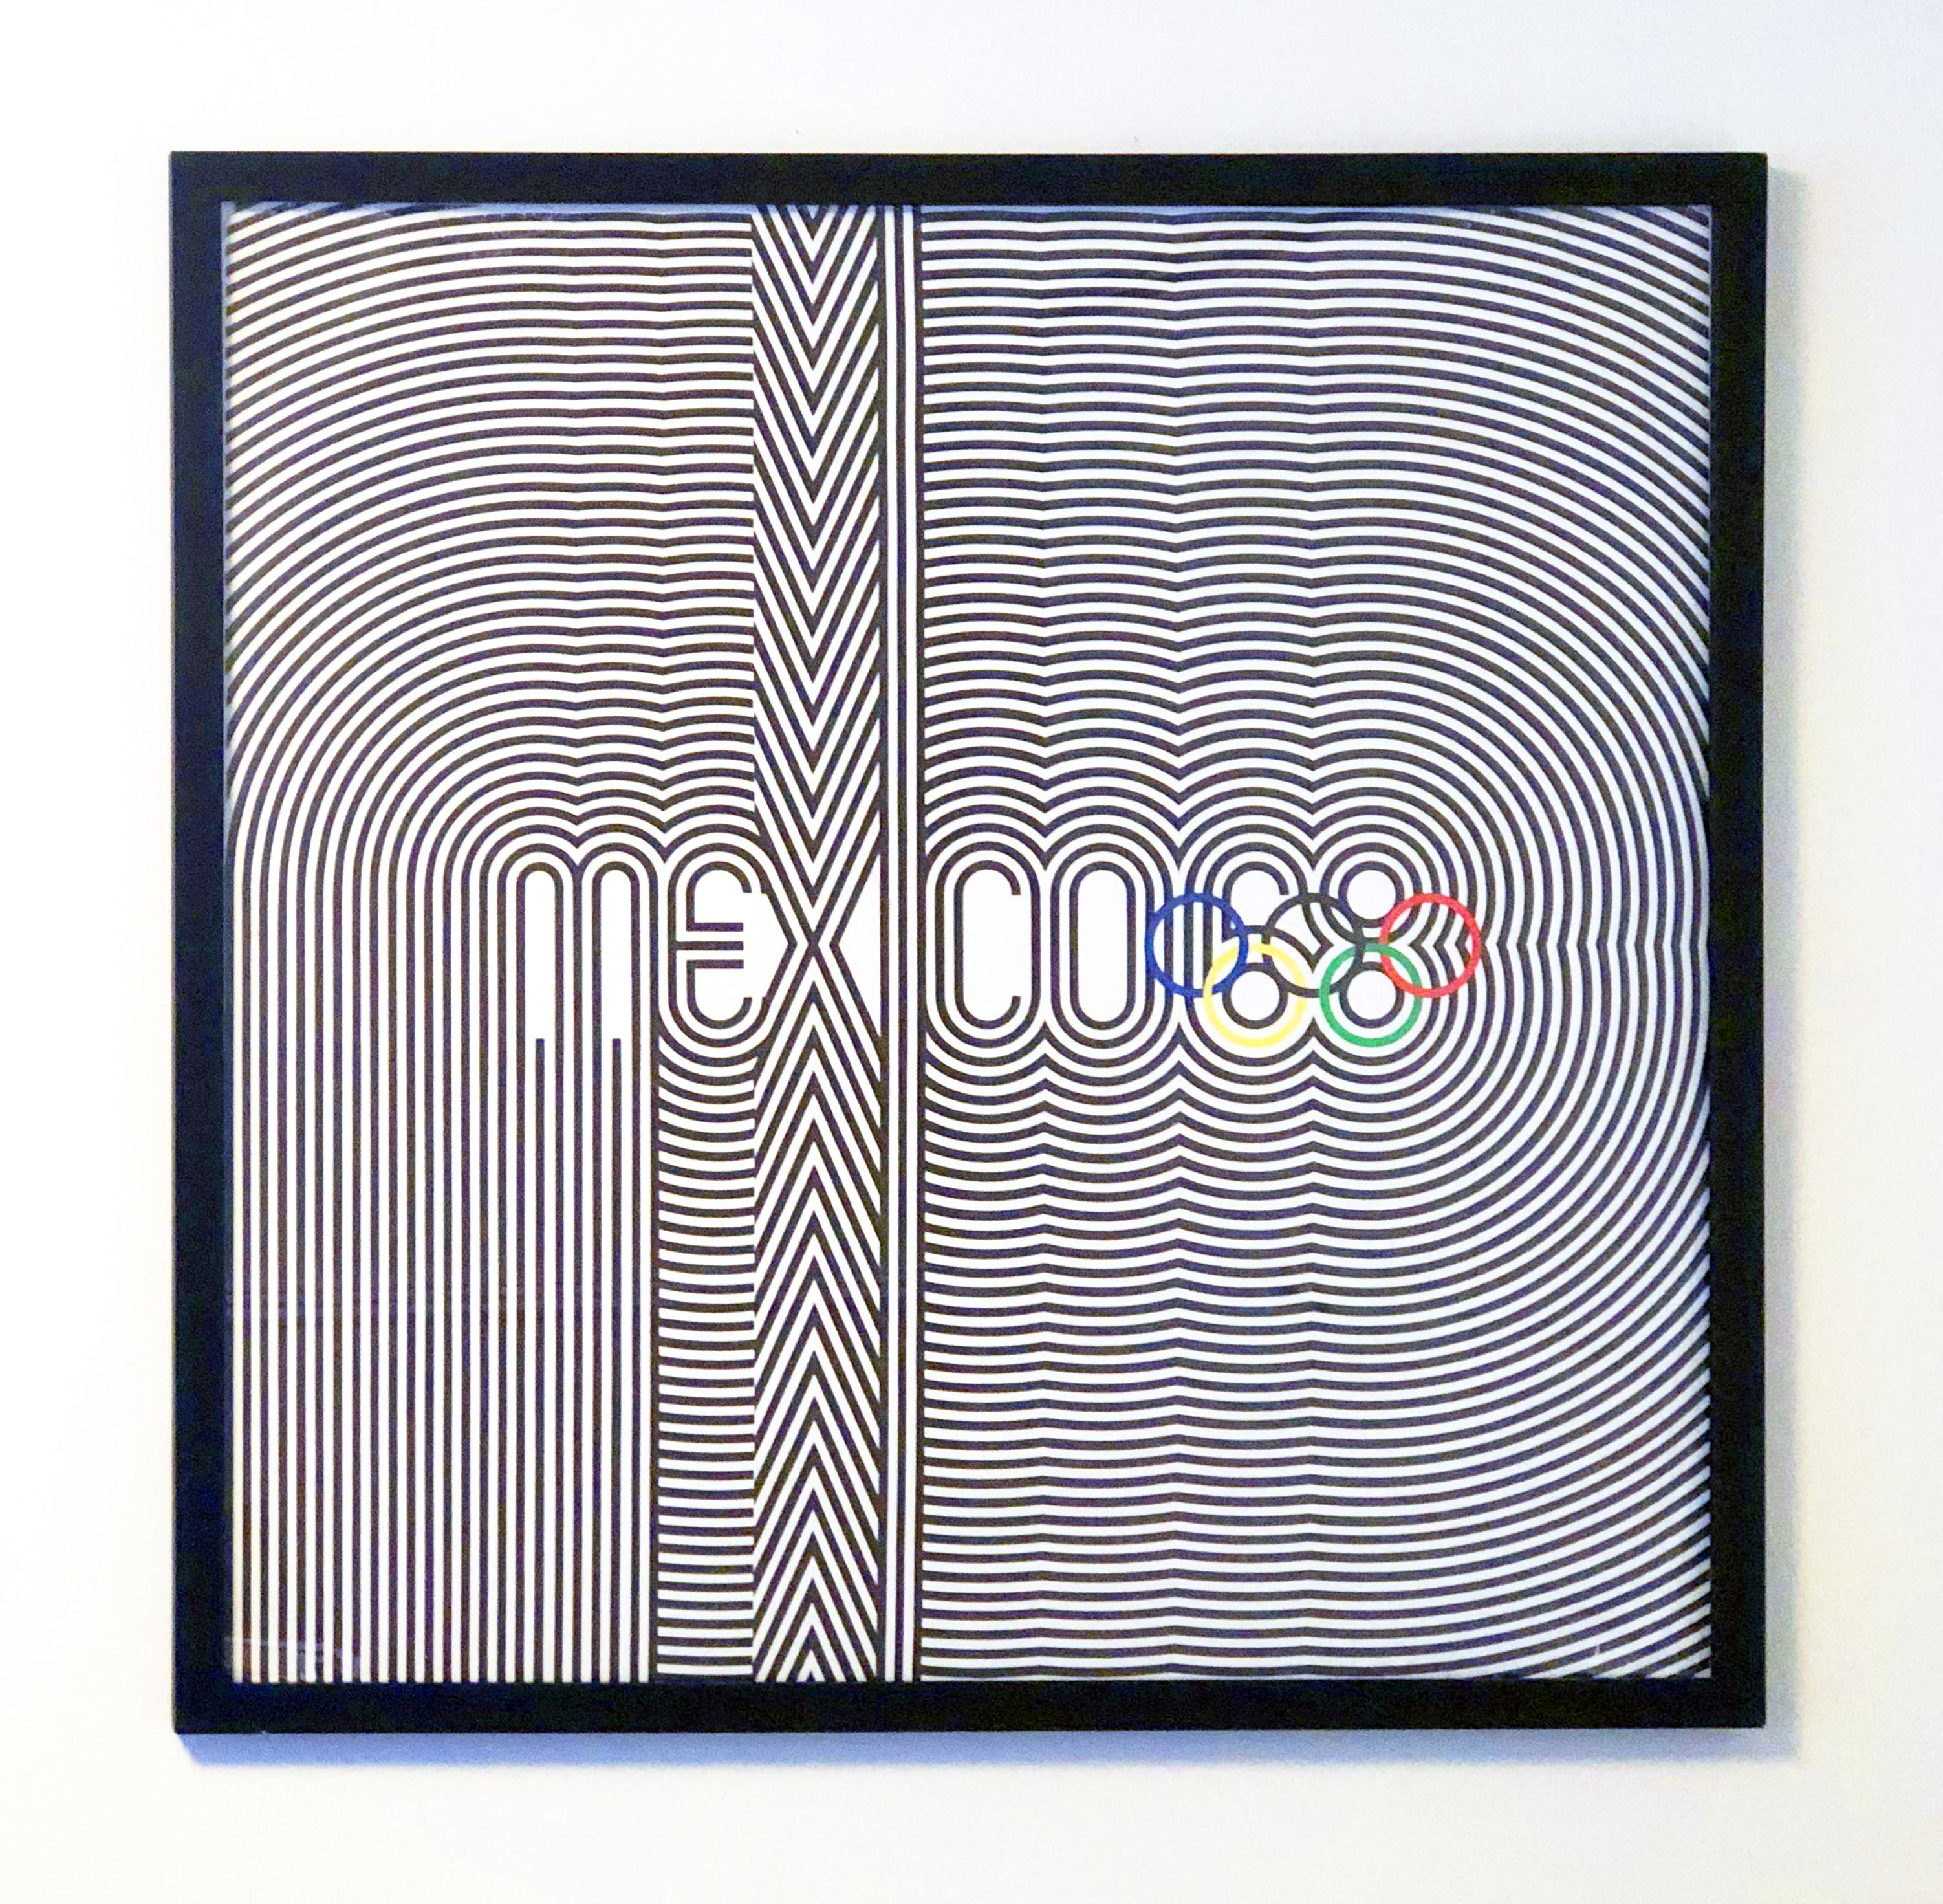 Original vintage sport poster for the 1968 Mexico Olympic Games - the Games of the XIX Olympiad October 12-27, 1968 - in a black lacquered wood frame.

The iconic “Mexico 68” event logo was designed by American graphic designer Lance Wyman in